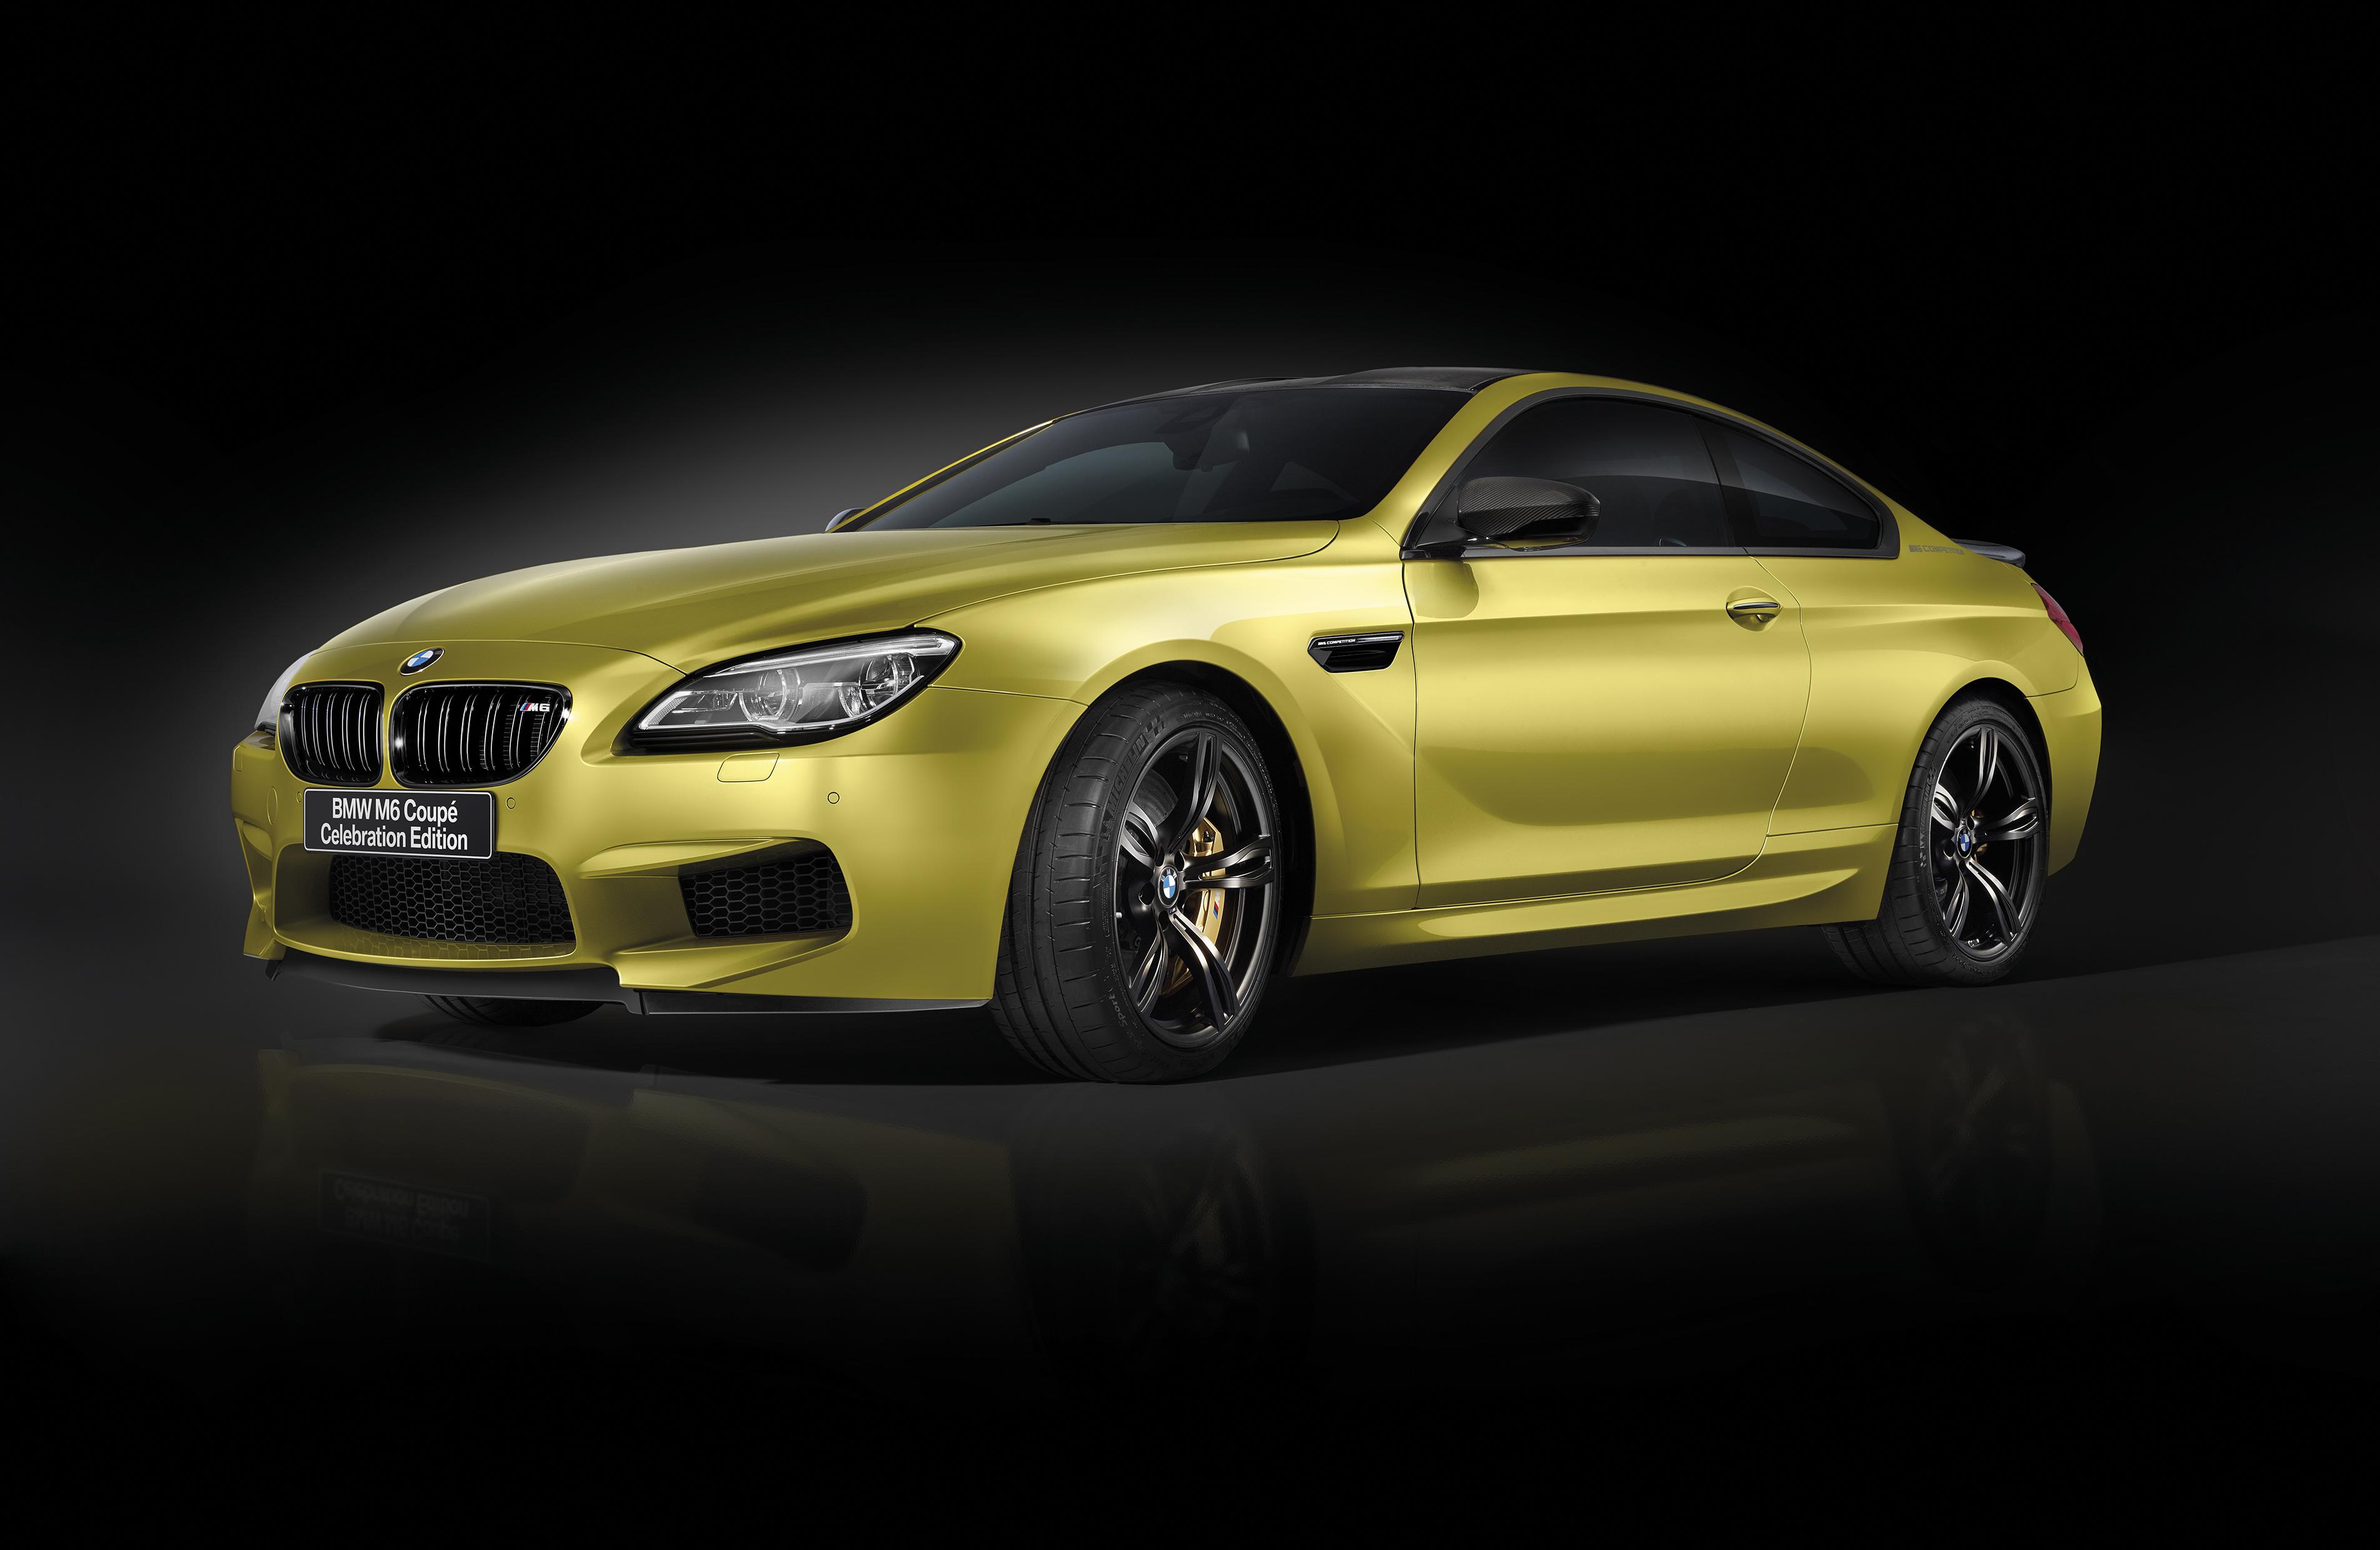 3807 x 2480 · jpeg - BMW M6 Wallpapers, Pictures, Images